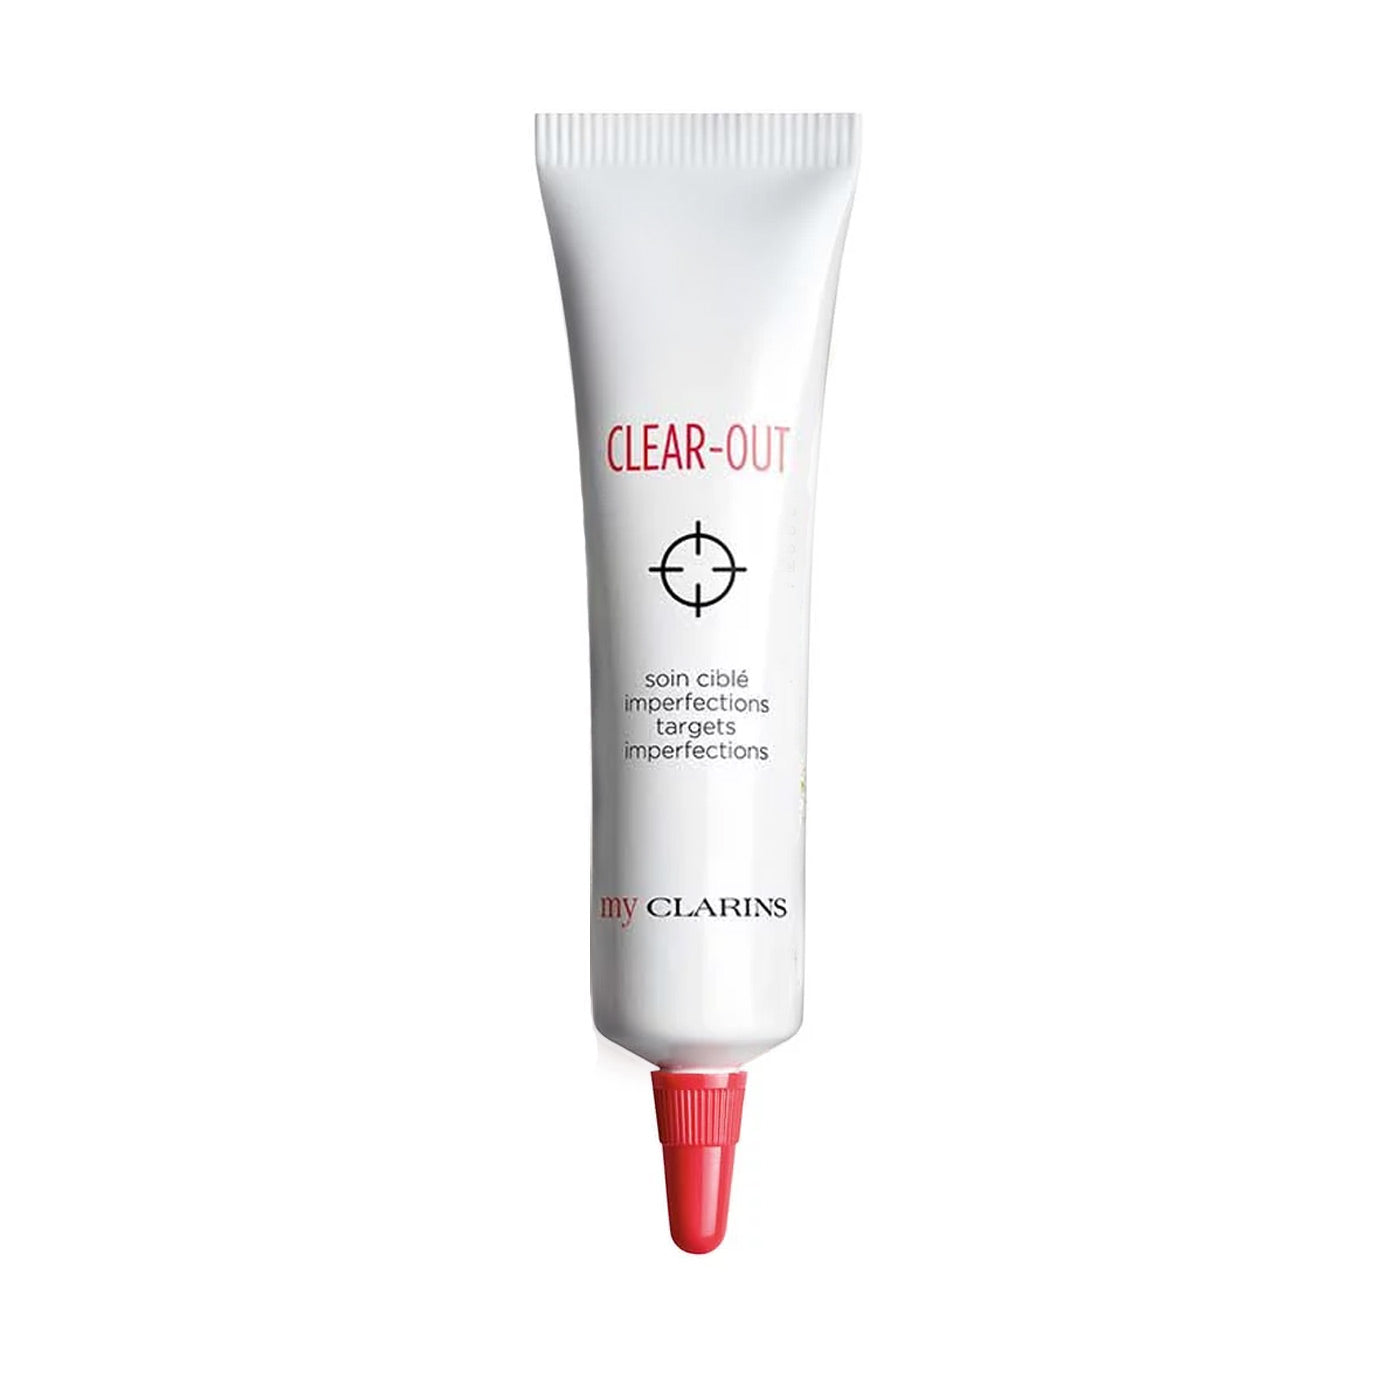 My Clarins Clear-Out Targets Imperfections - MazenOnline